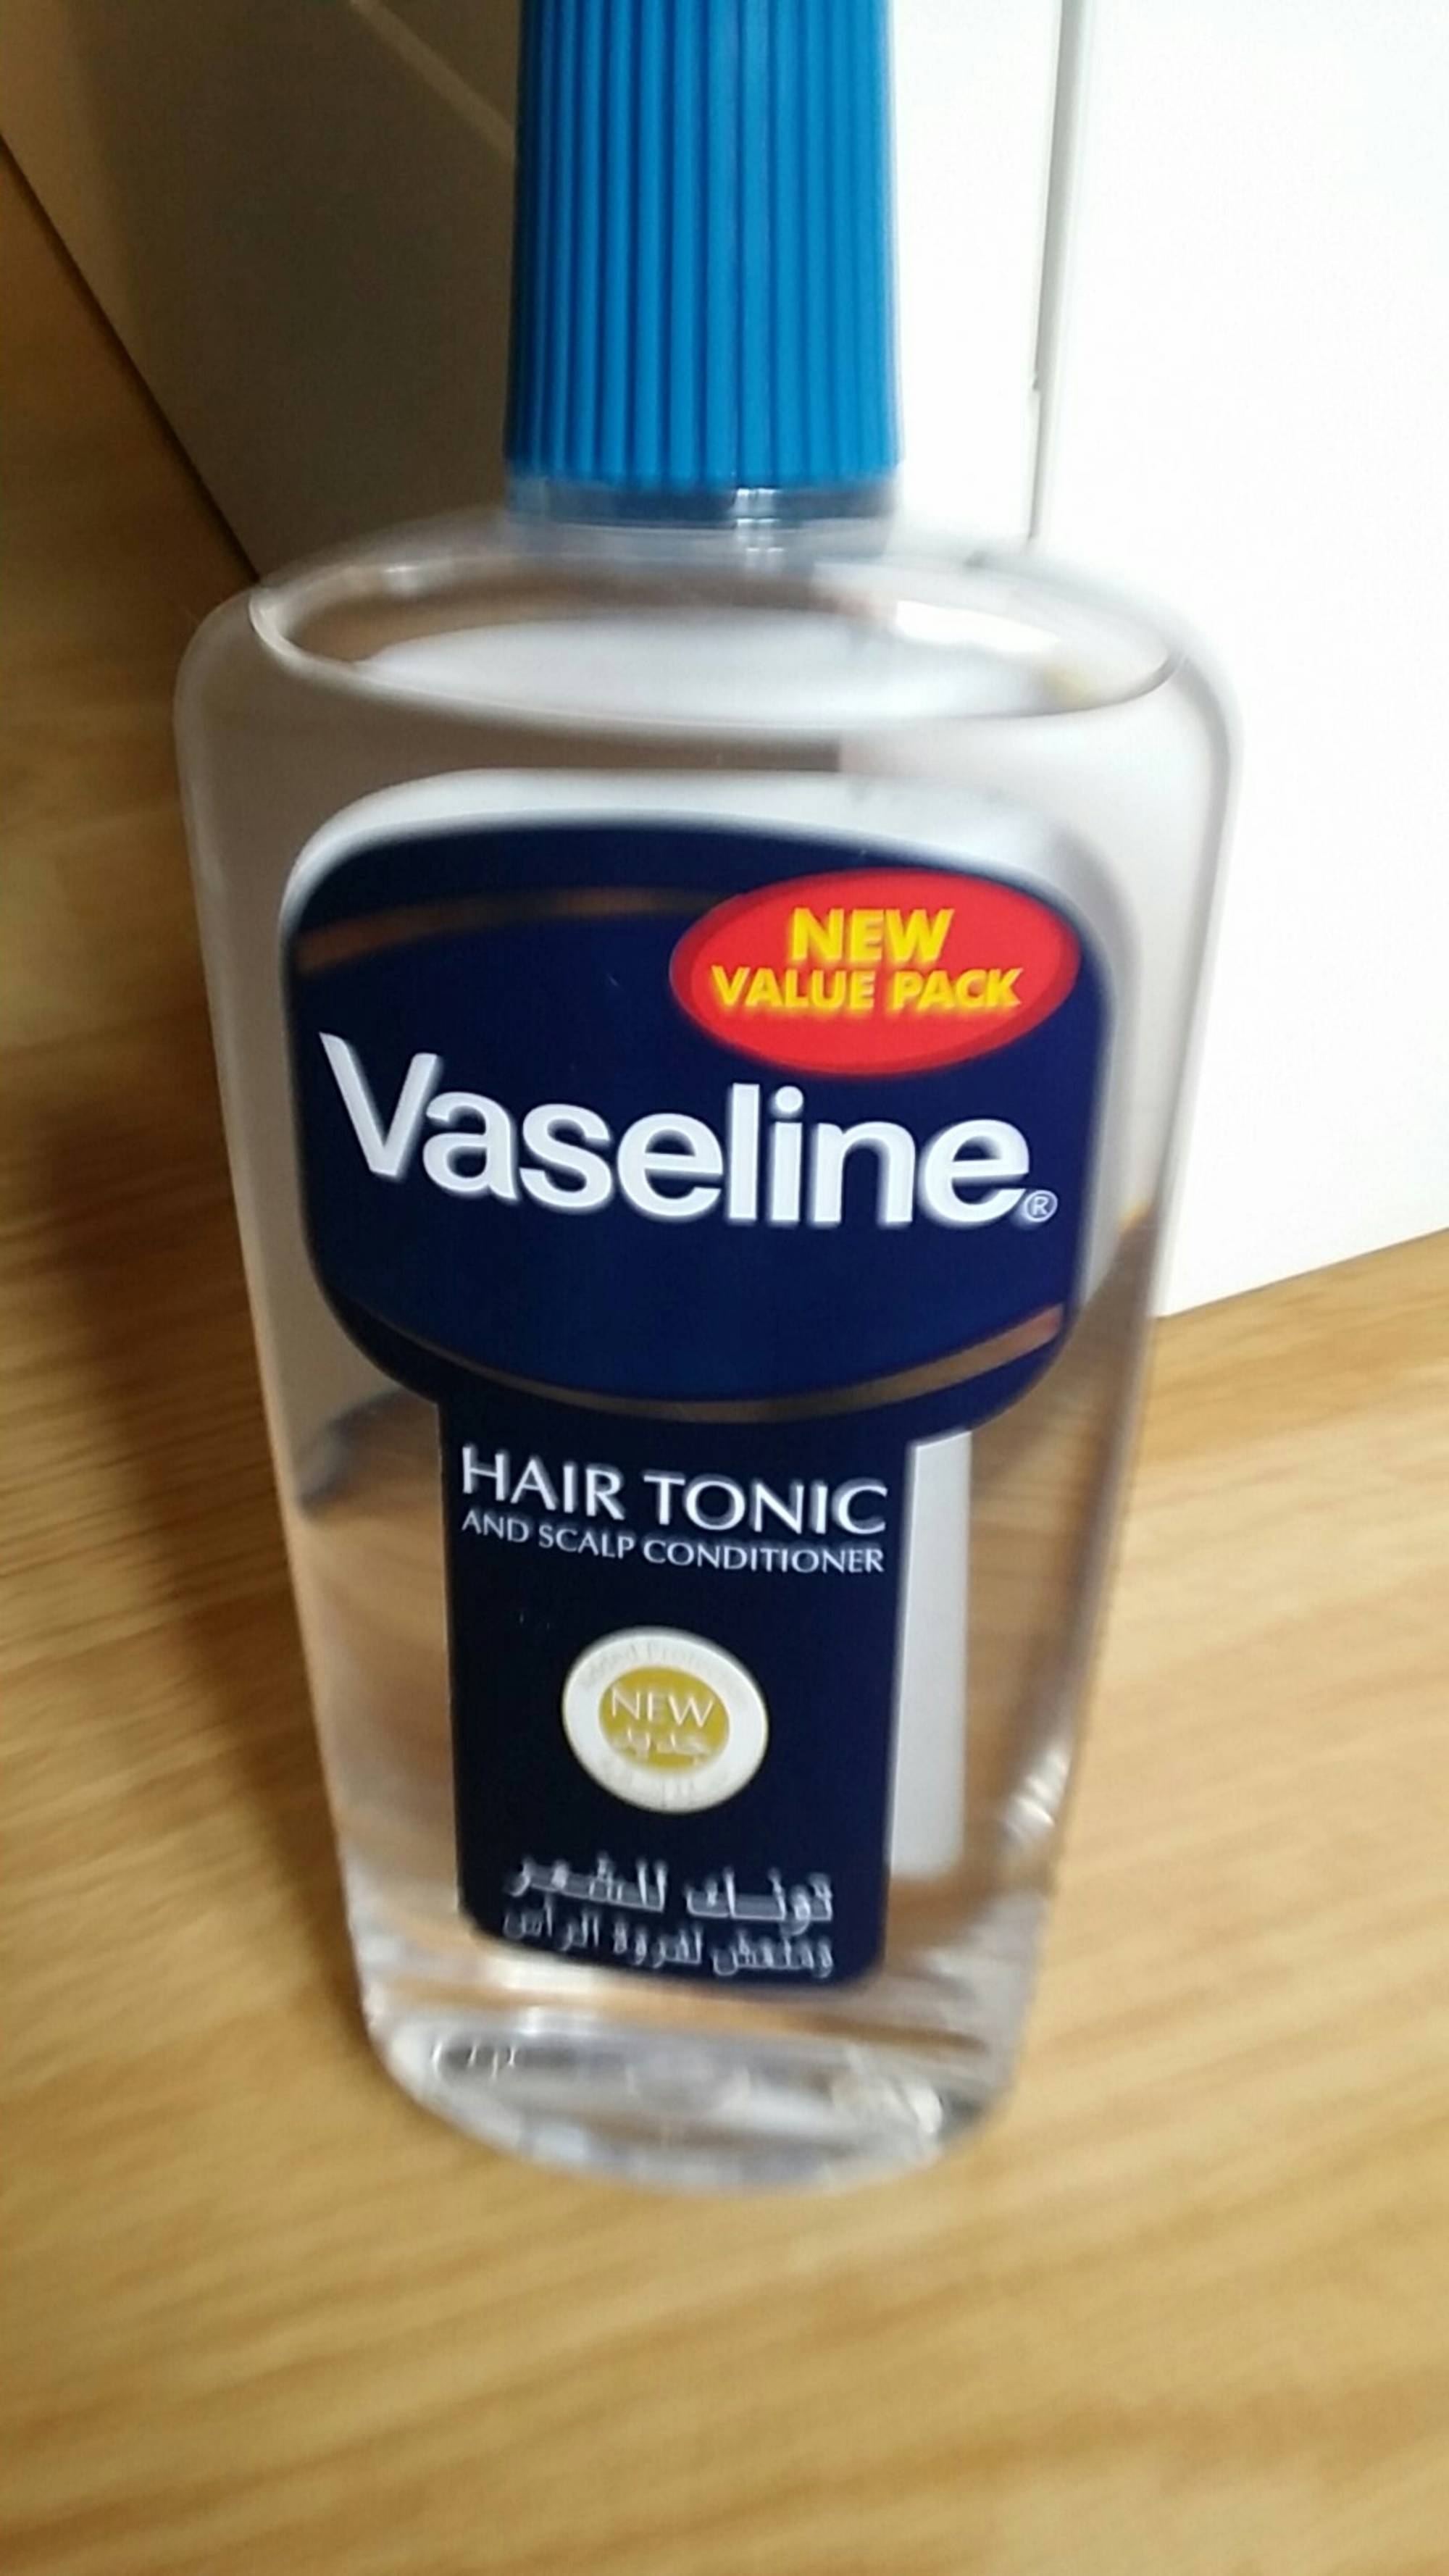 VASELINE - Hair tonic and scalp conditioner